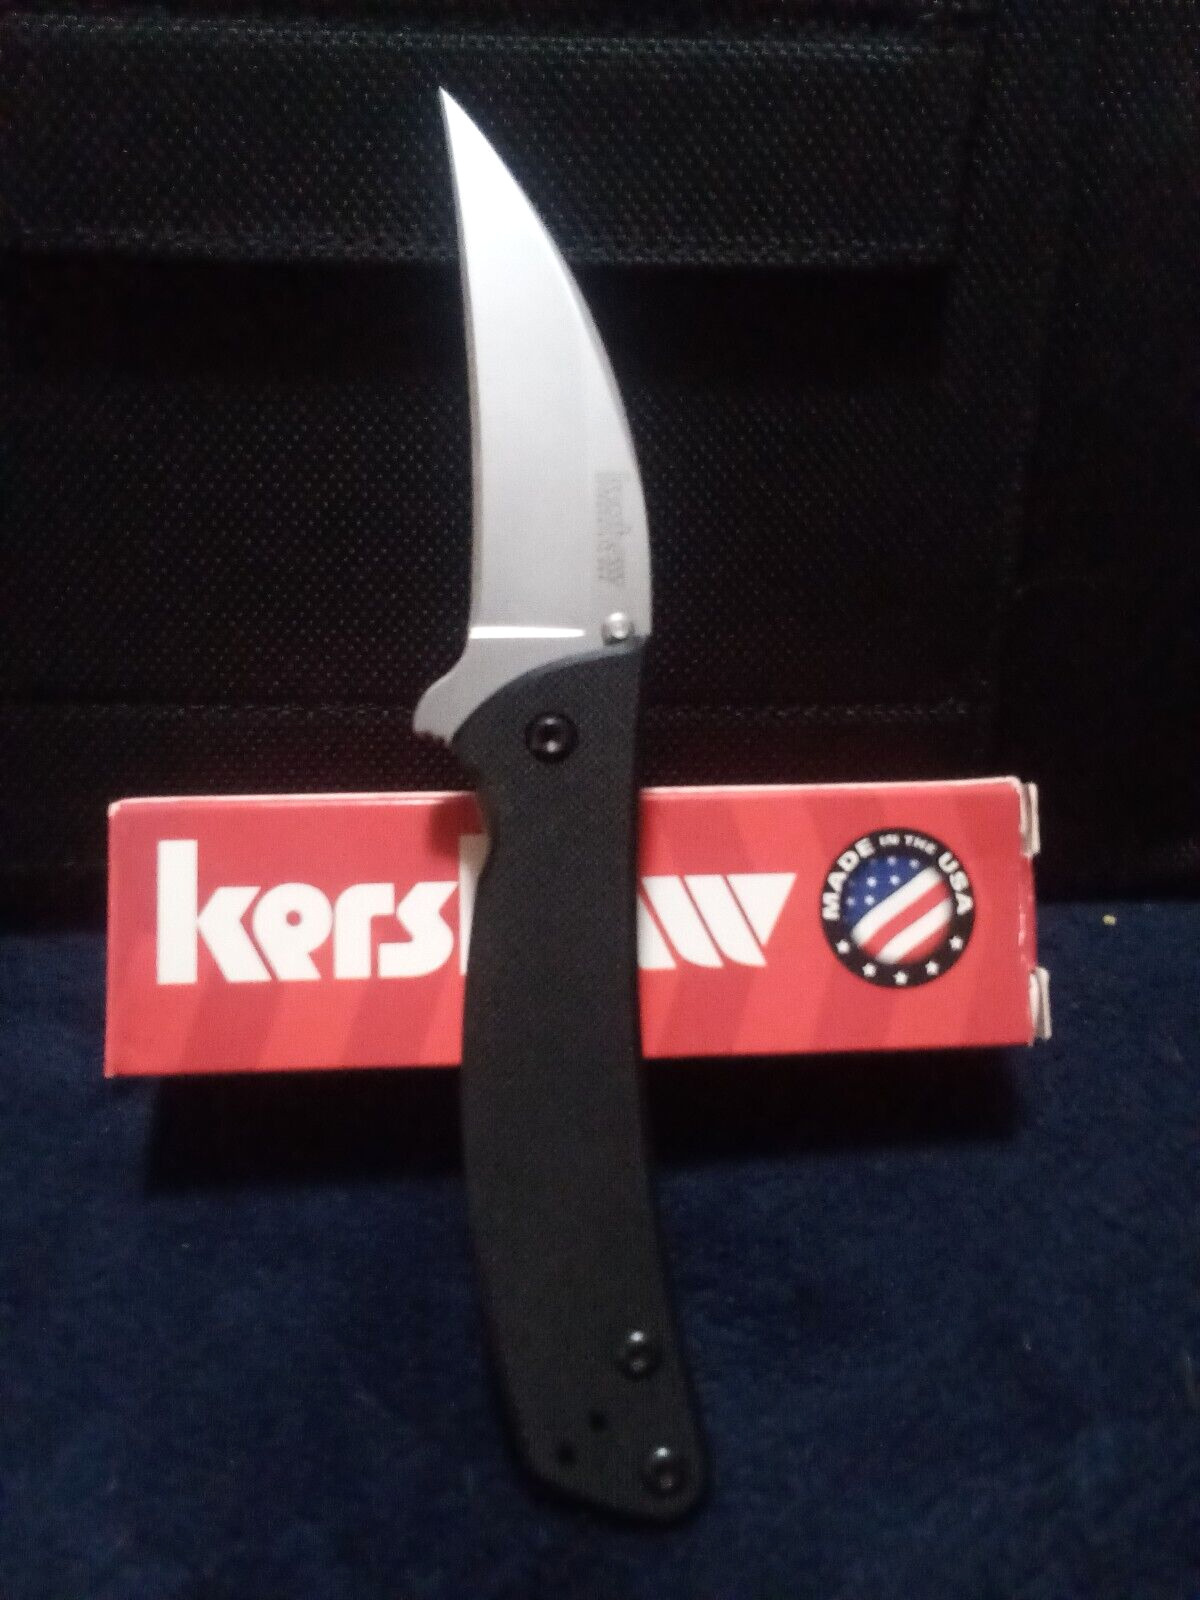 kershaw pocket knife 1425 talon ll new in box made in the usa 